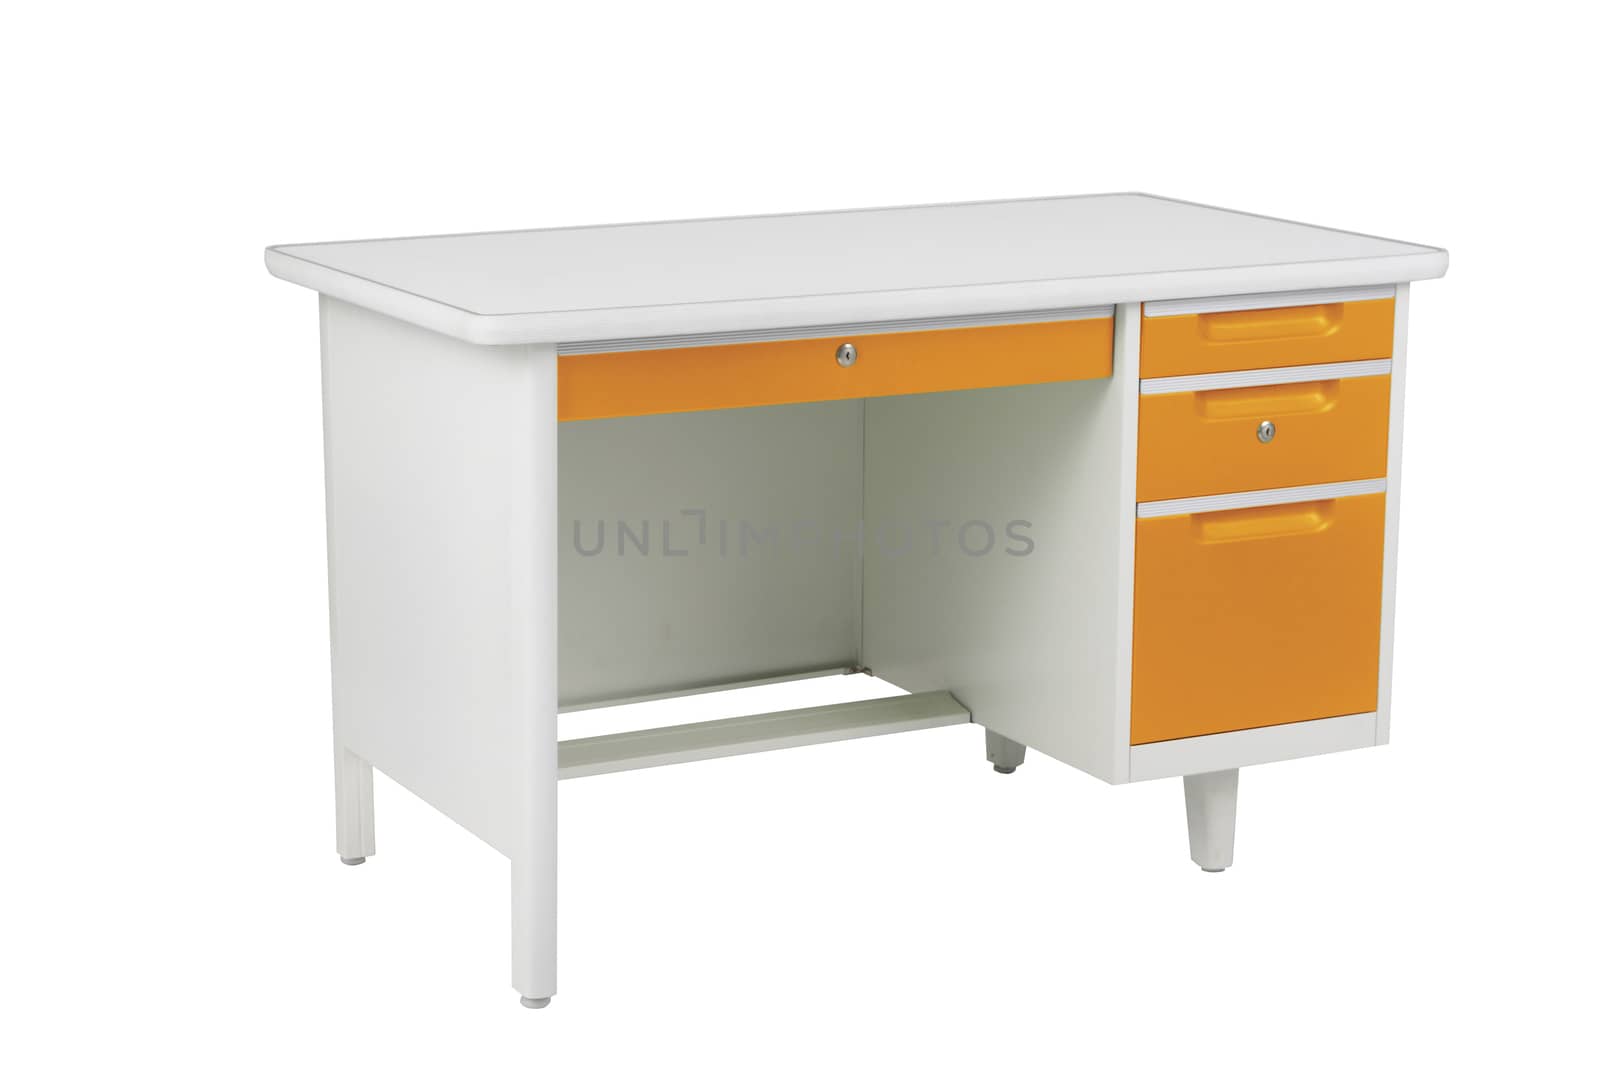 Orange and white steel office table with drawers furniture isolated on white background. by sonandonures